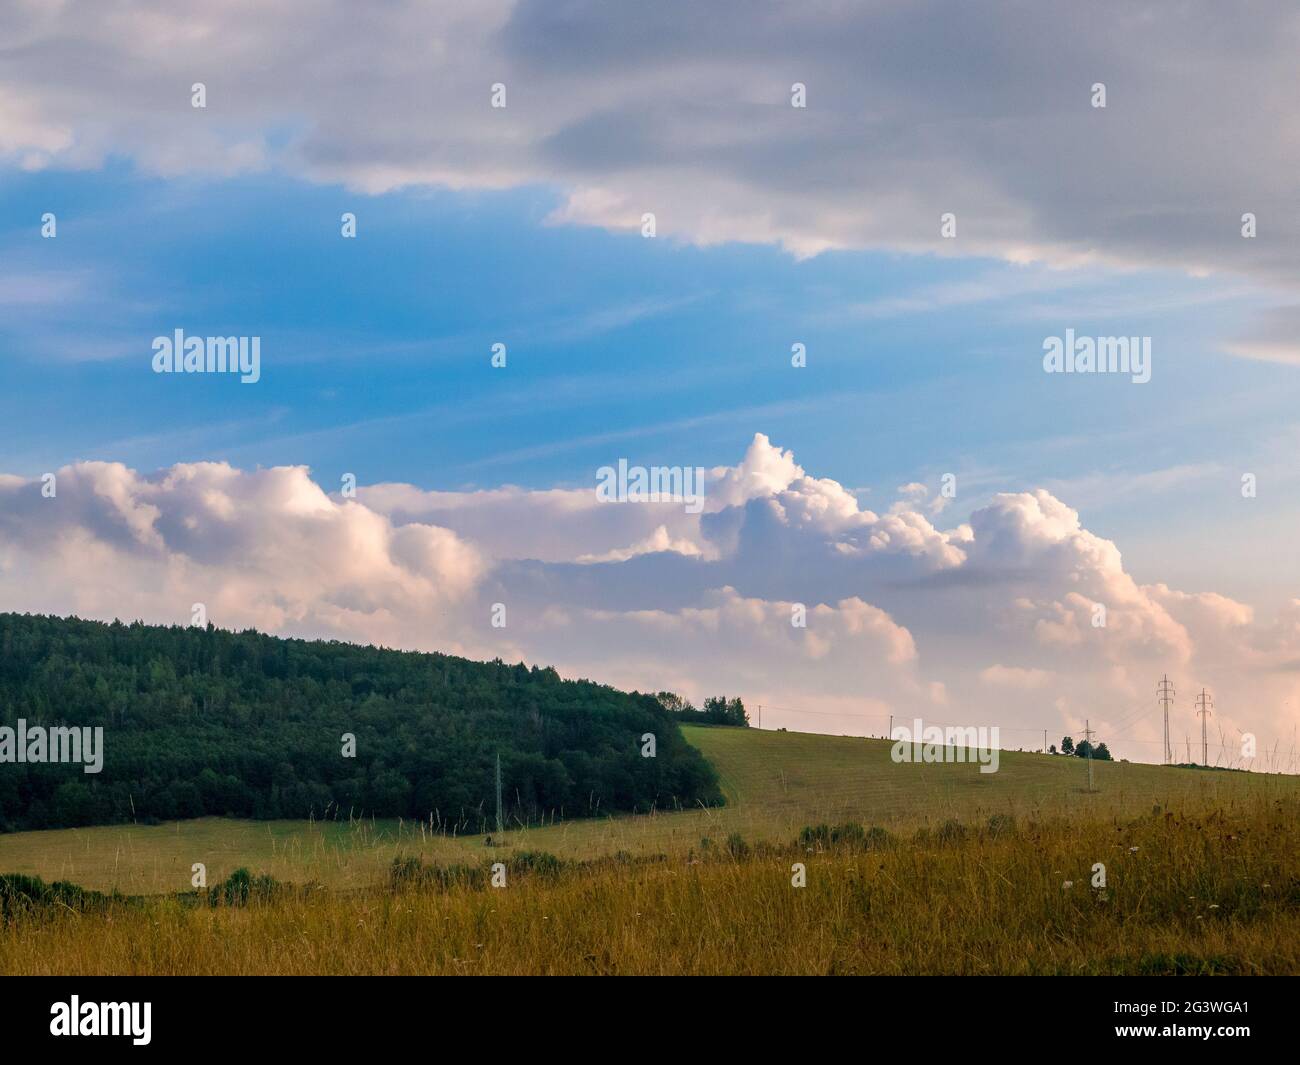 Massive clouds - towering cumulus - forming in the blue sky behind hilly landscape on the horizon Stock Photo